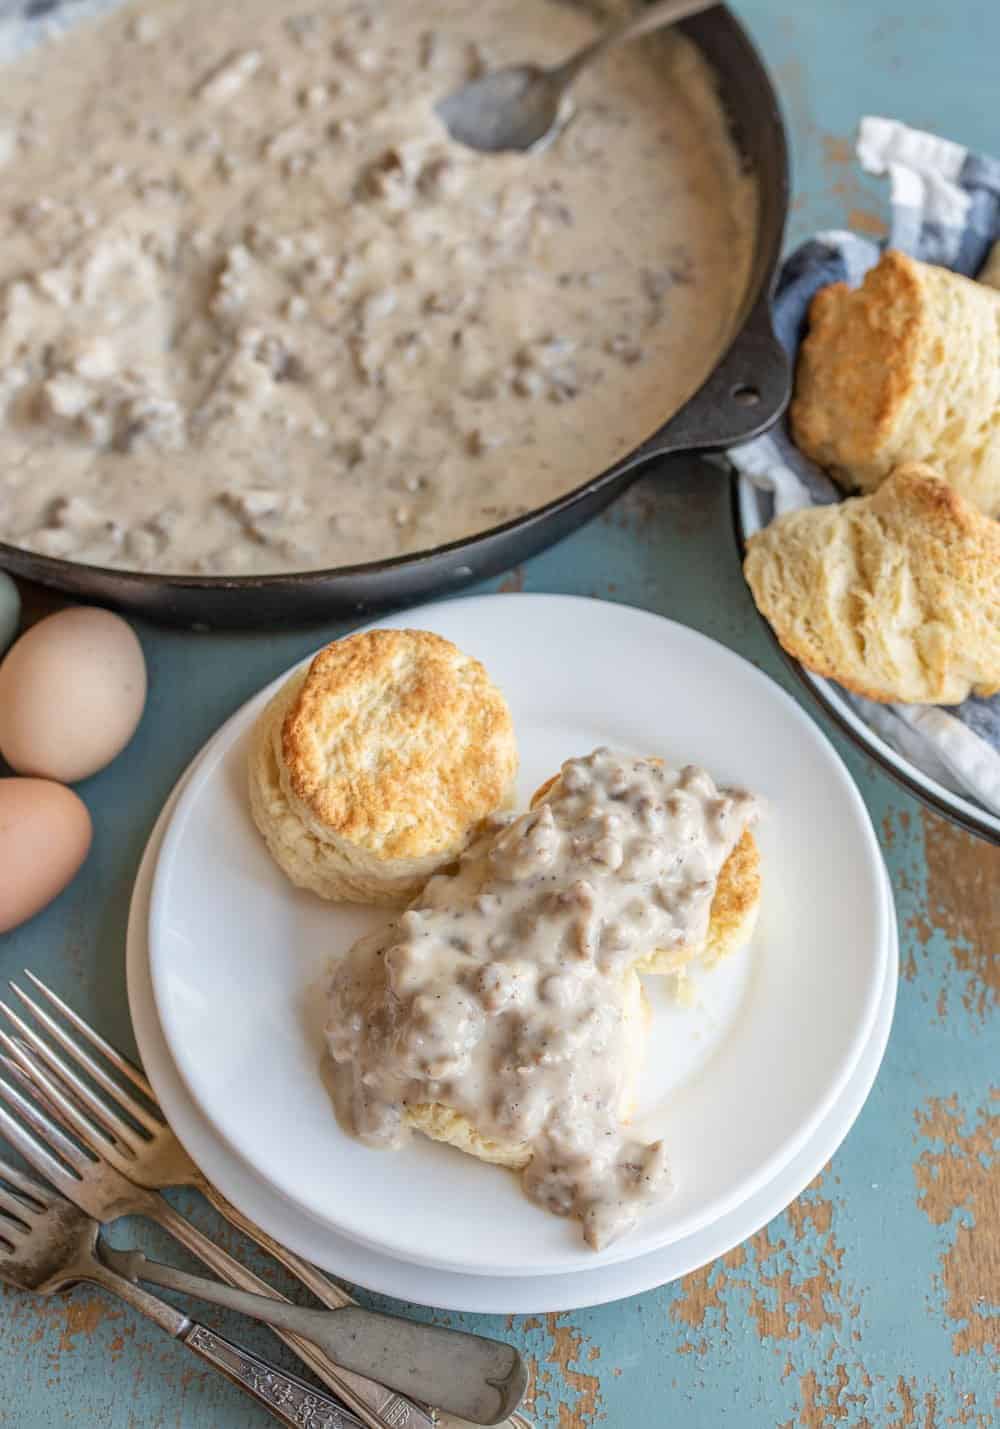 White plate with biscuit on it and a biscuit topped with gravy on a light blue table with a pan of gravy in the background